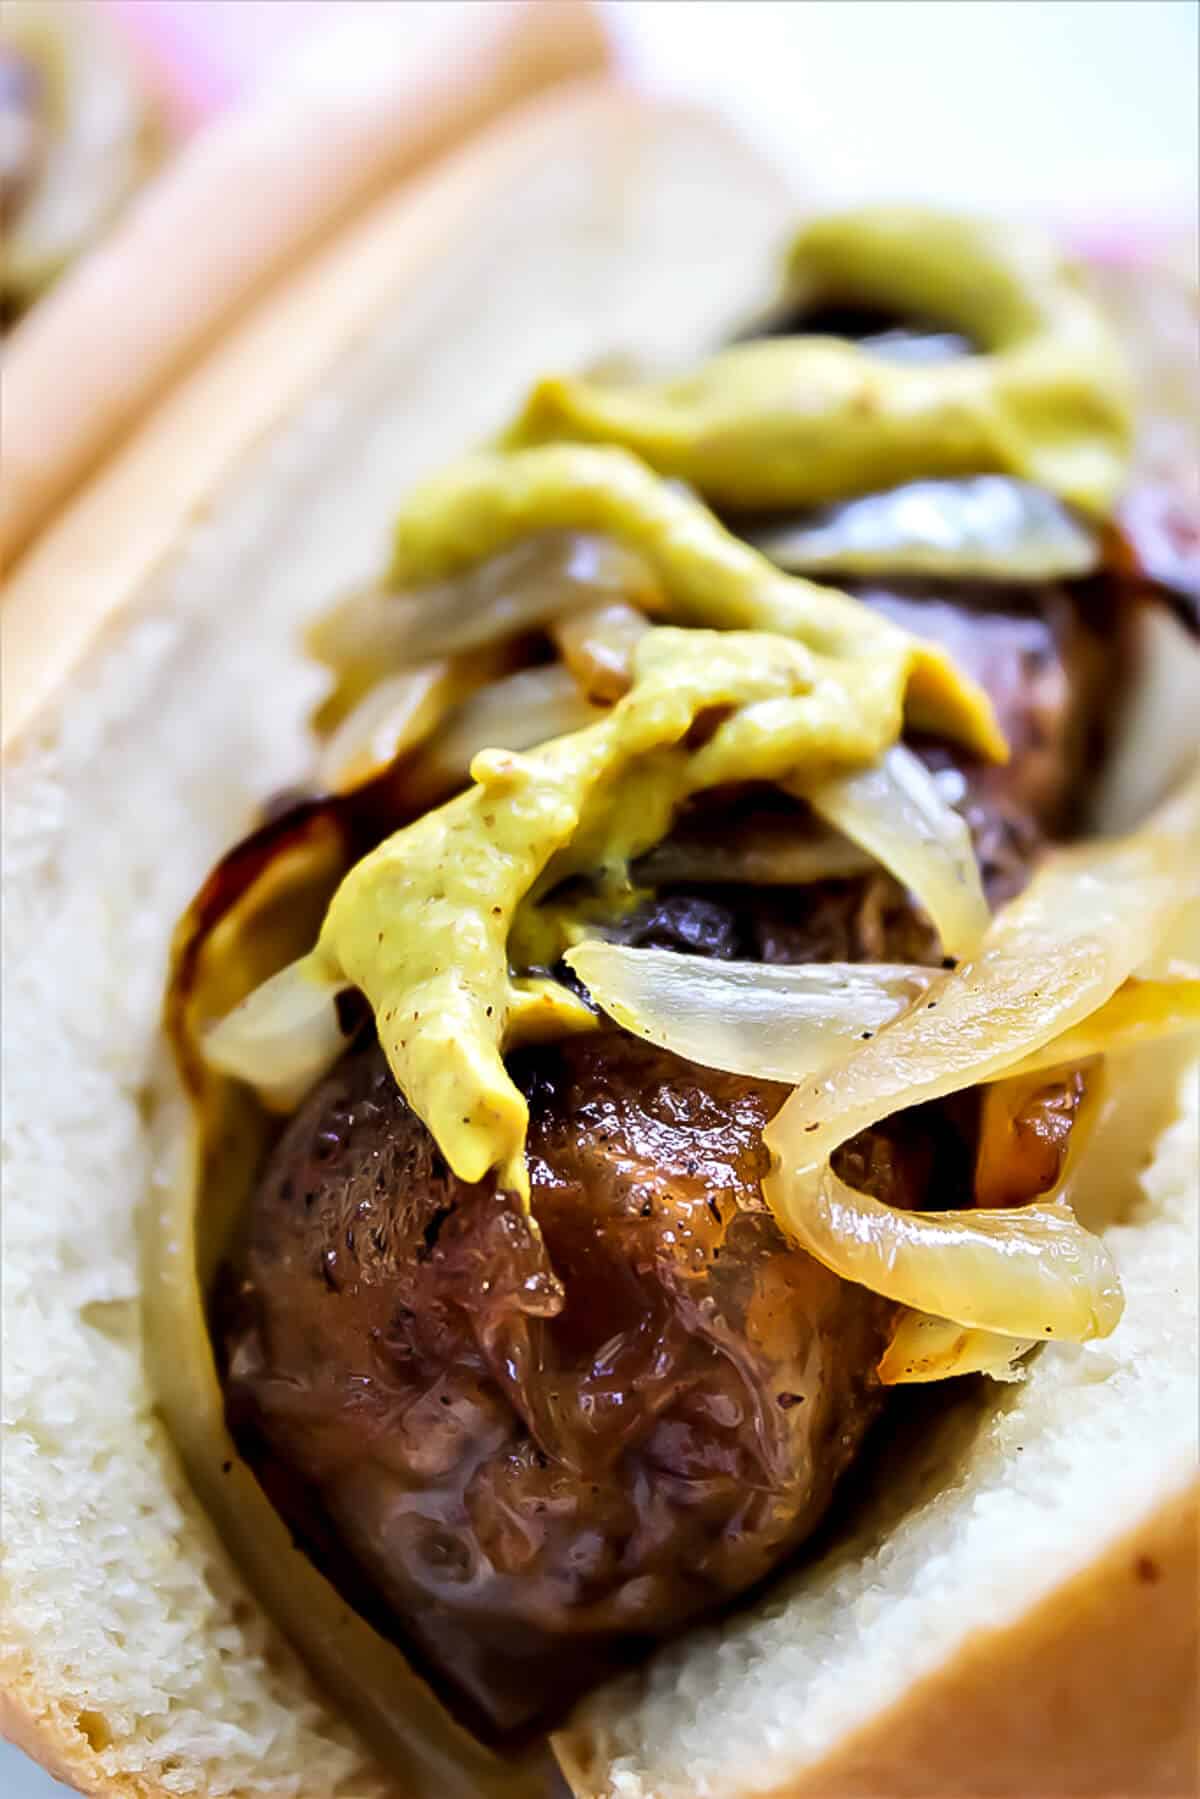 Vegan beer brat sausage with fried onions and mustard.